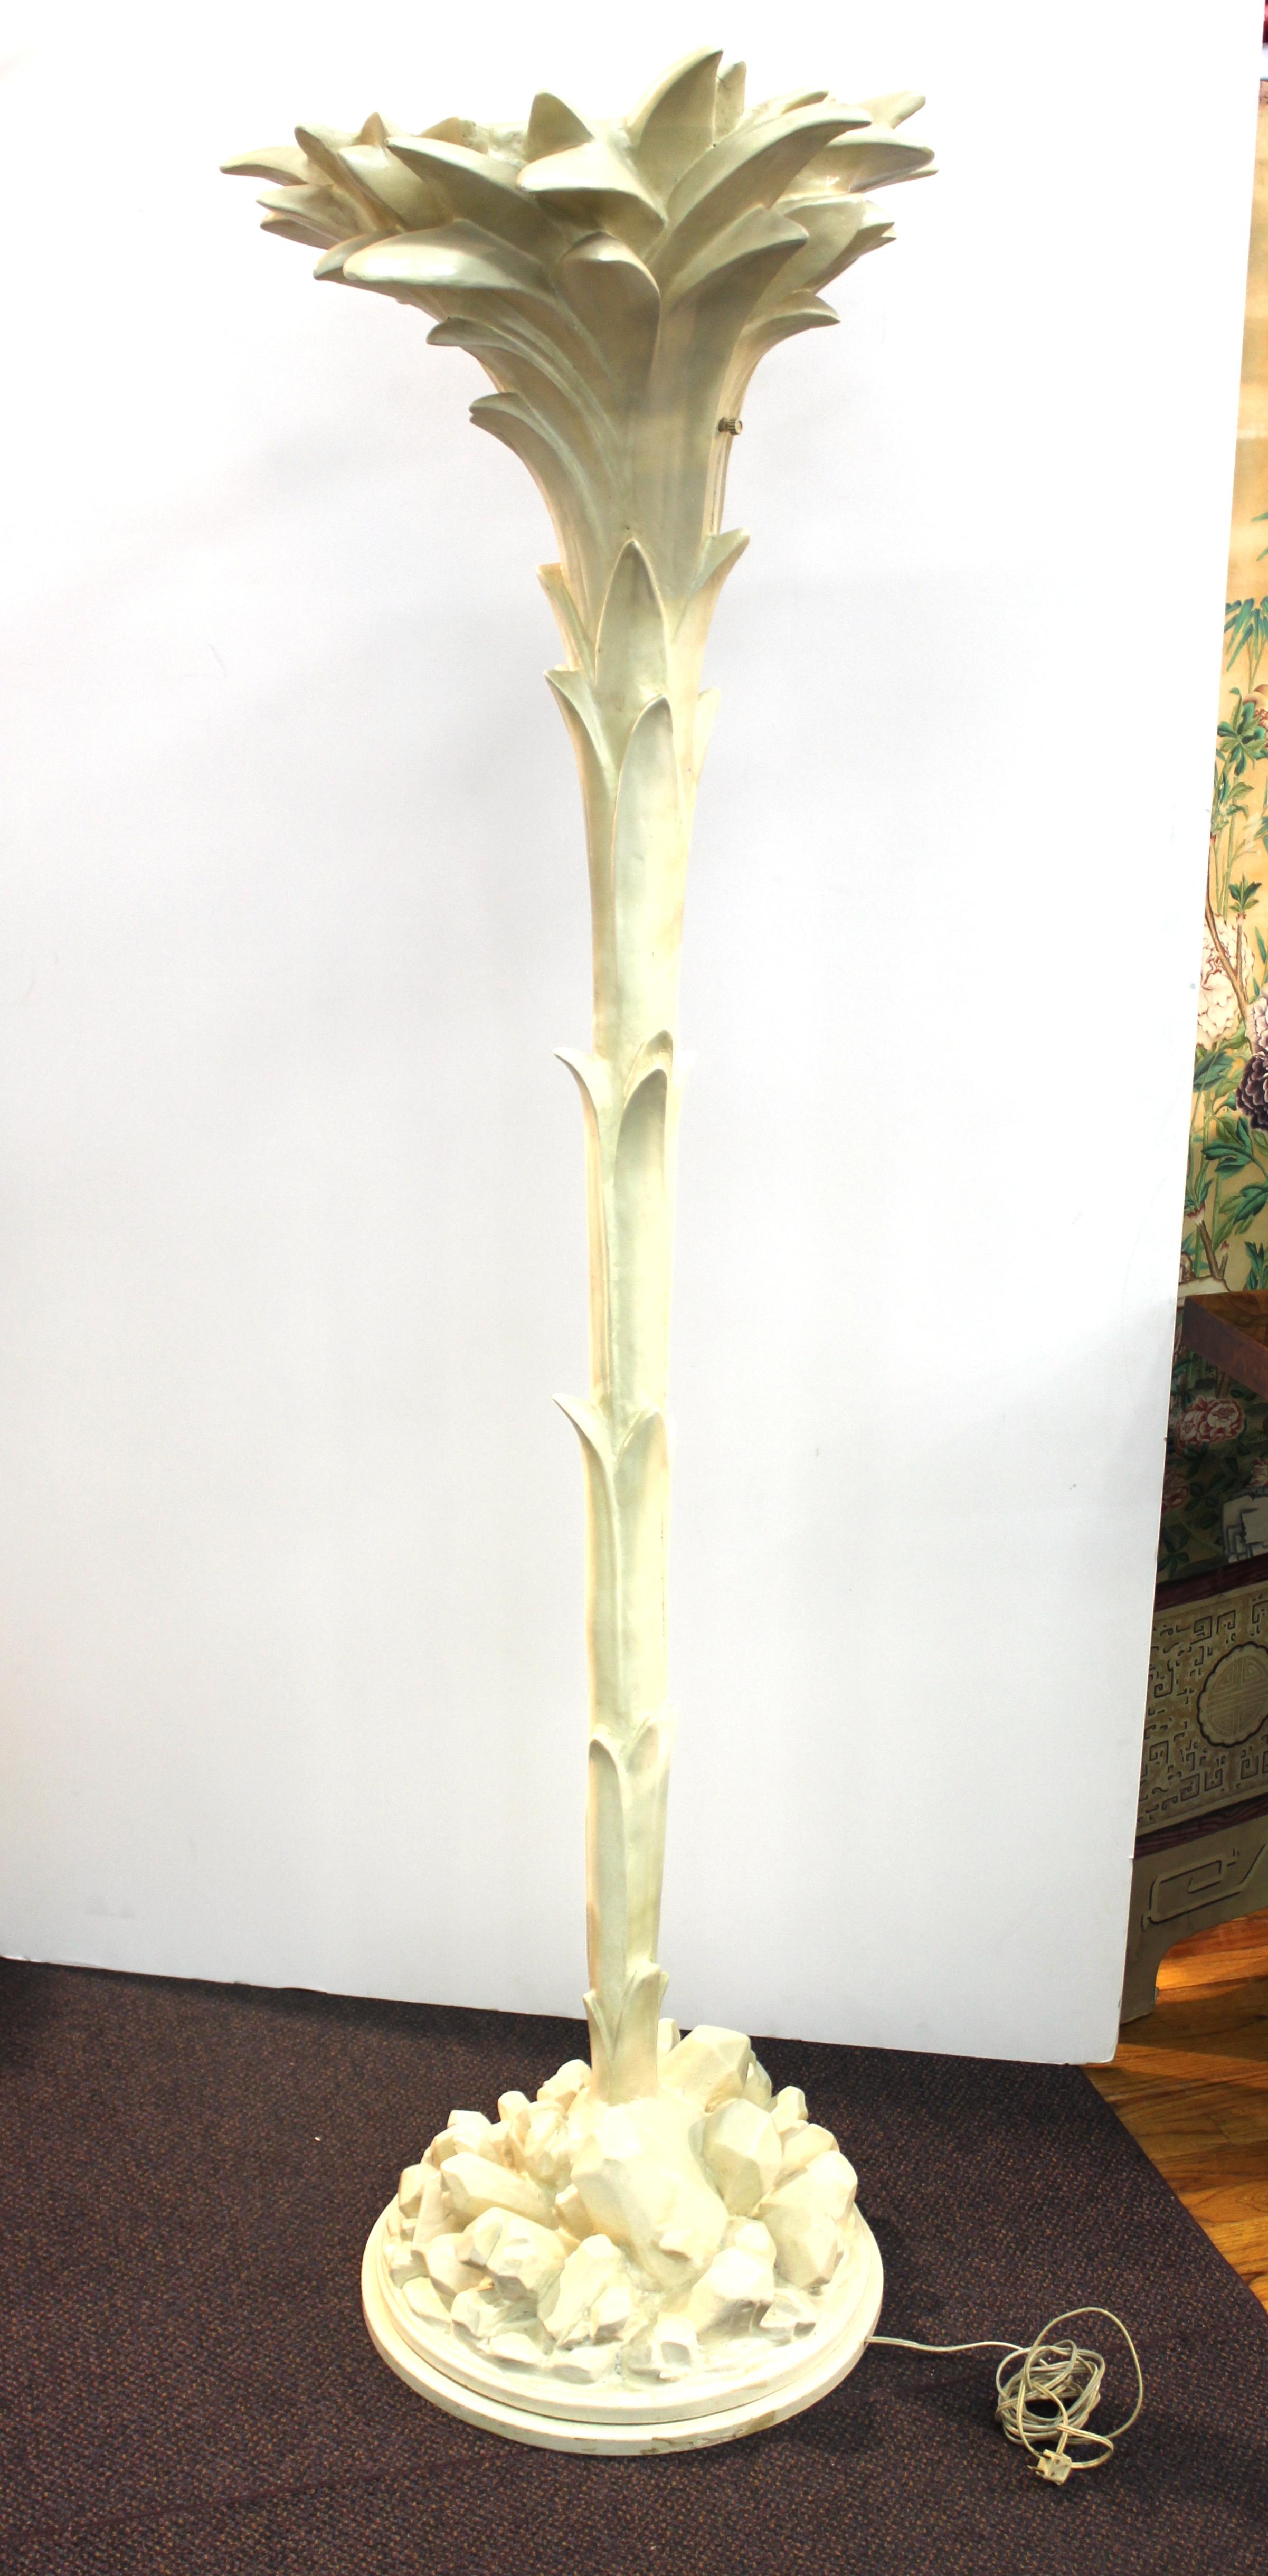 Baroque Revival Serge Roche Attributed Palm Tree Floor Lamp